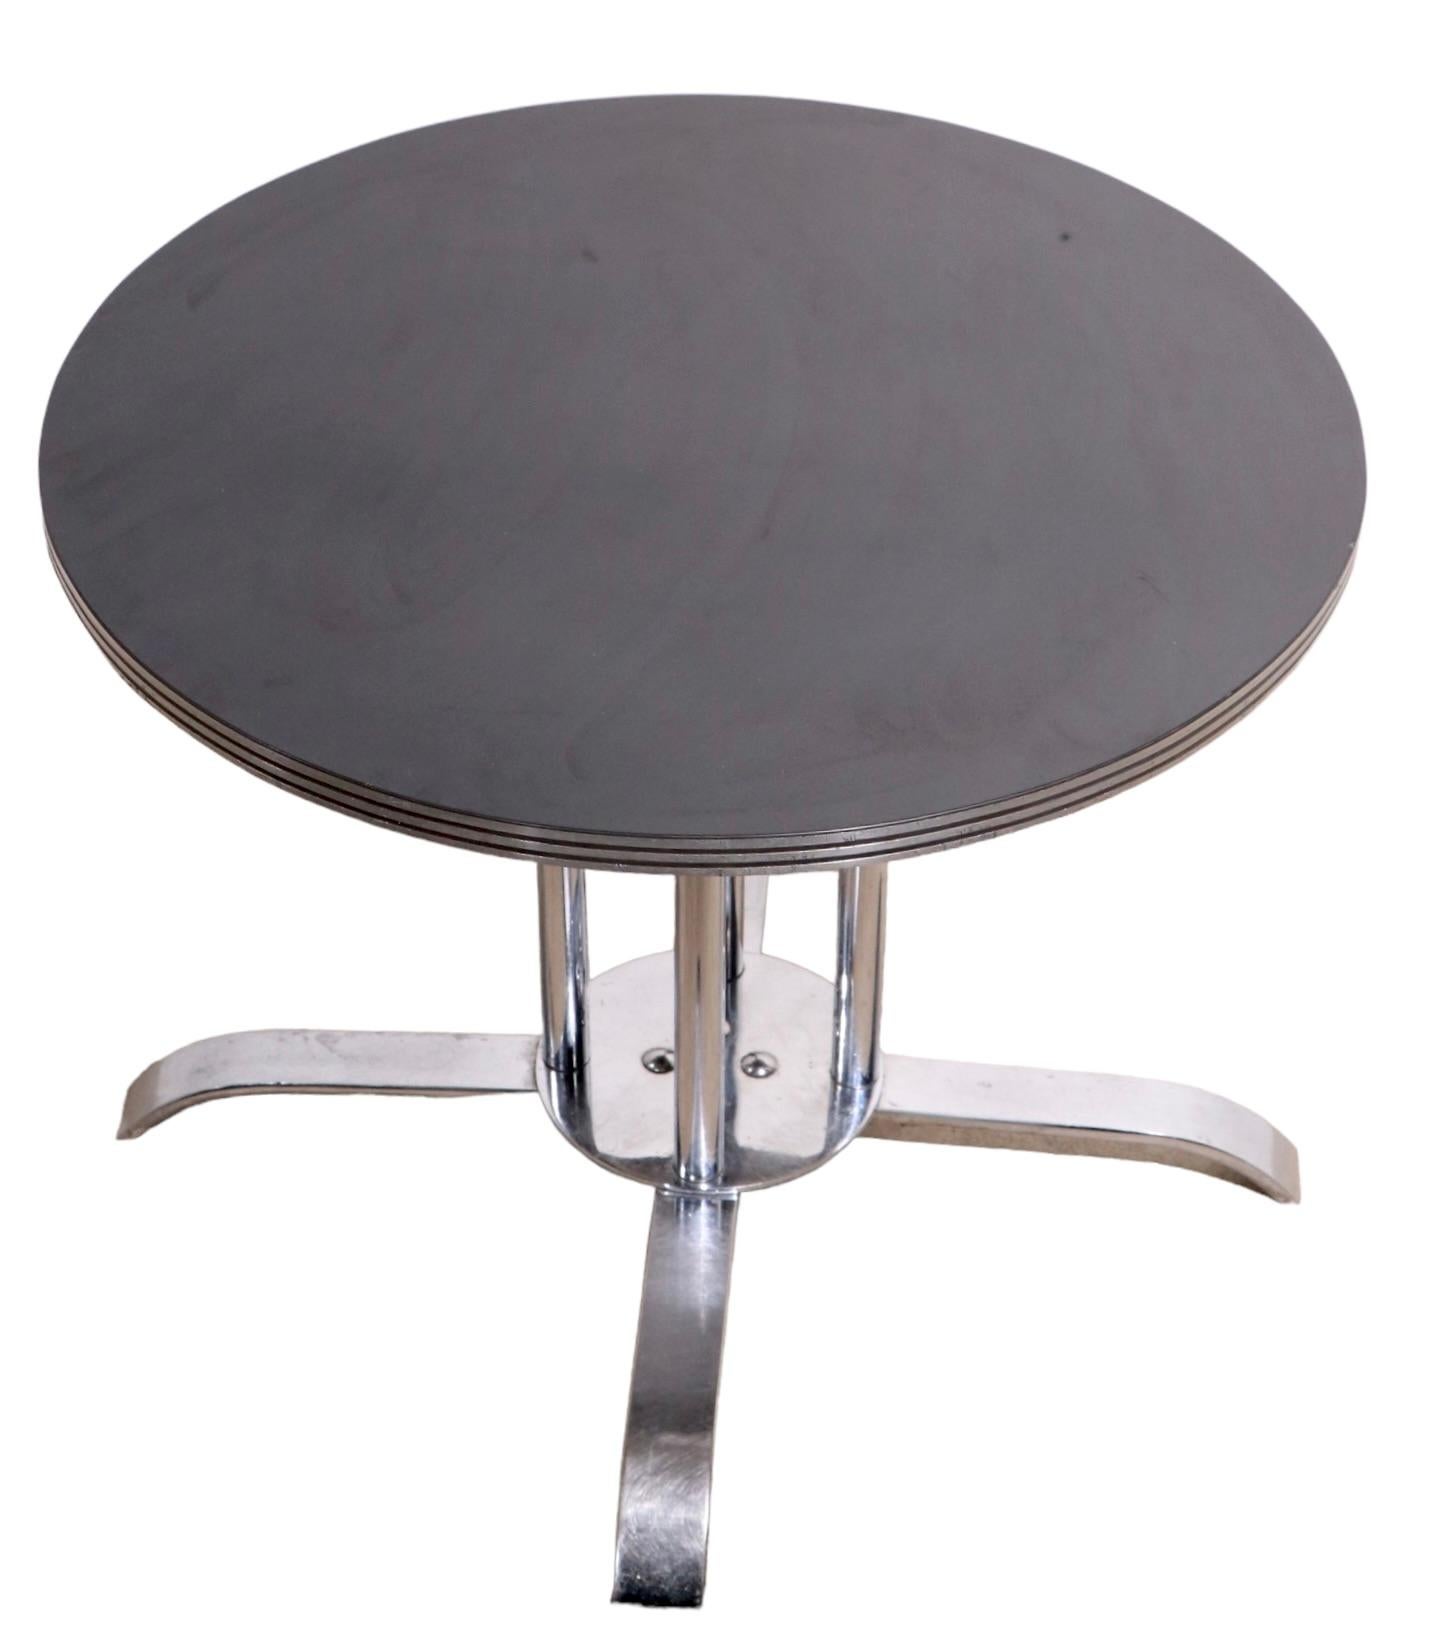 Art déco Art Deco Machine Age Chrome Table by McKay Craft Furniture Made in USA c 1930's en vente